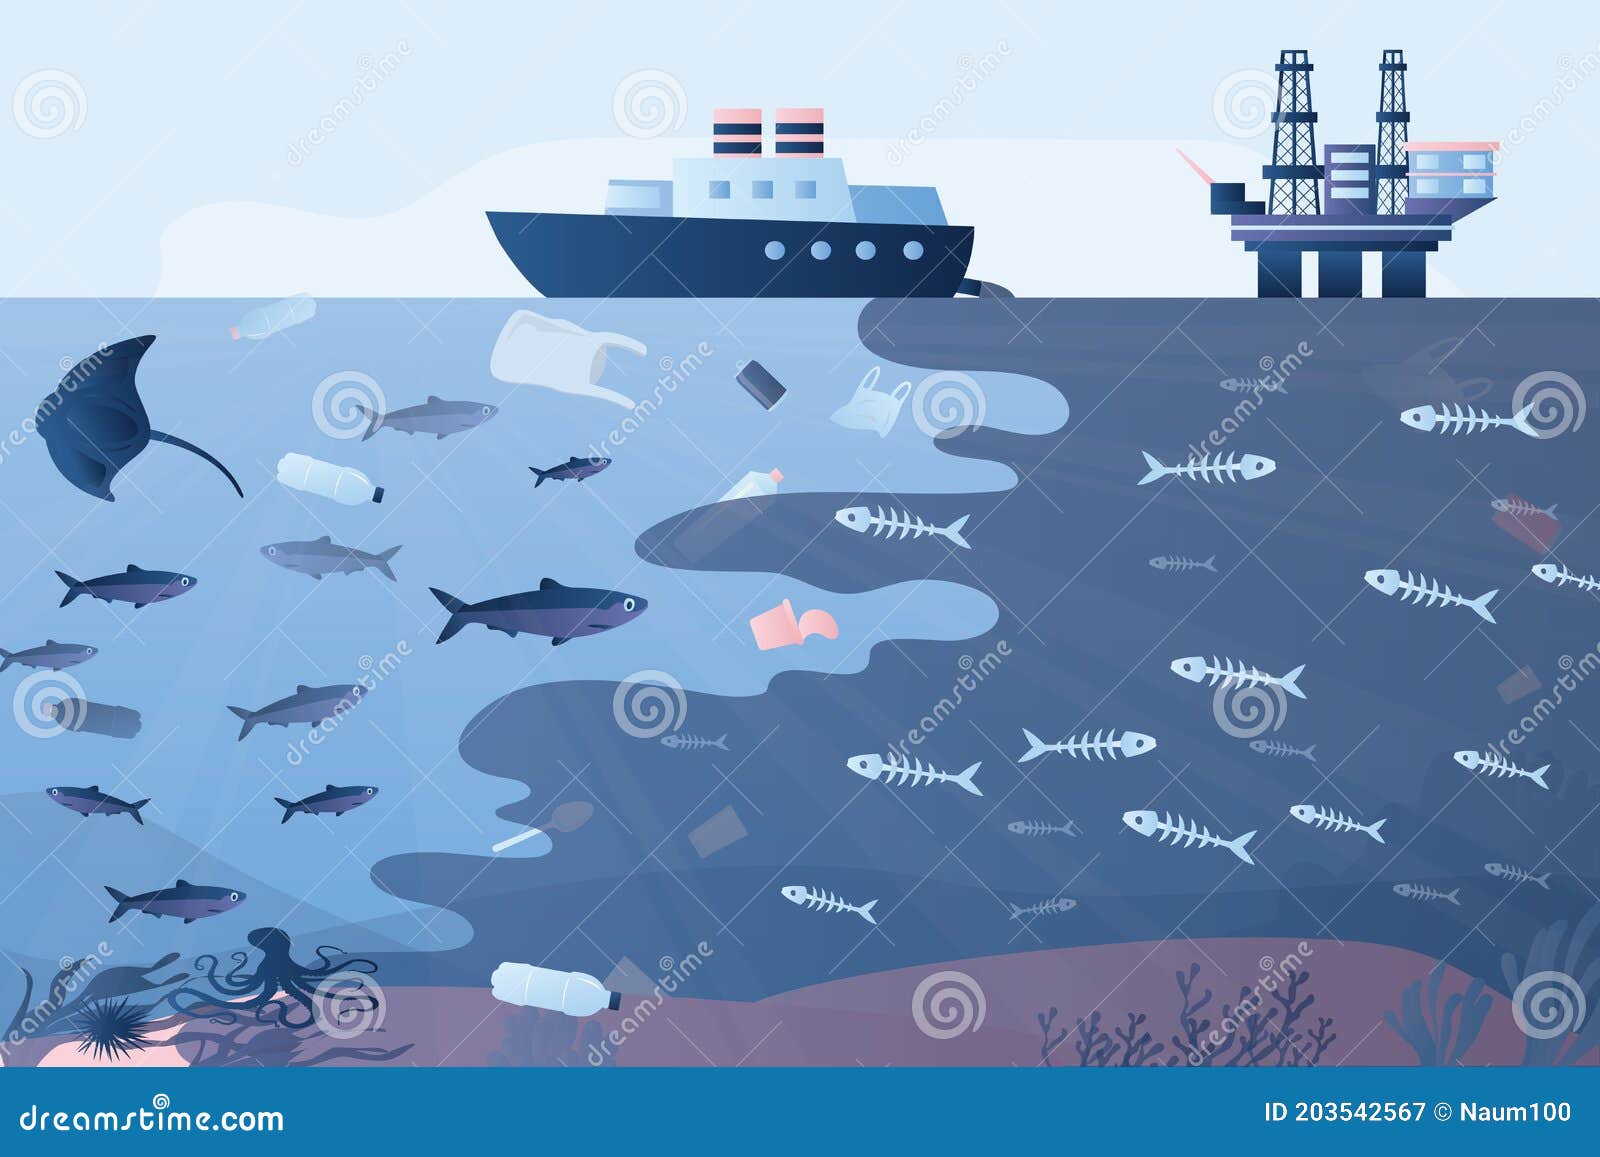 Ocean Pollution Card Template. Offshore Oil Rigs, Dirty Ship and ...